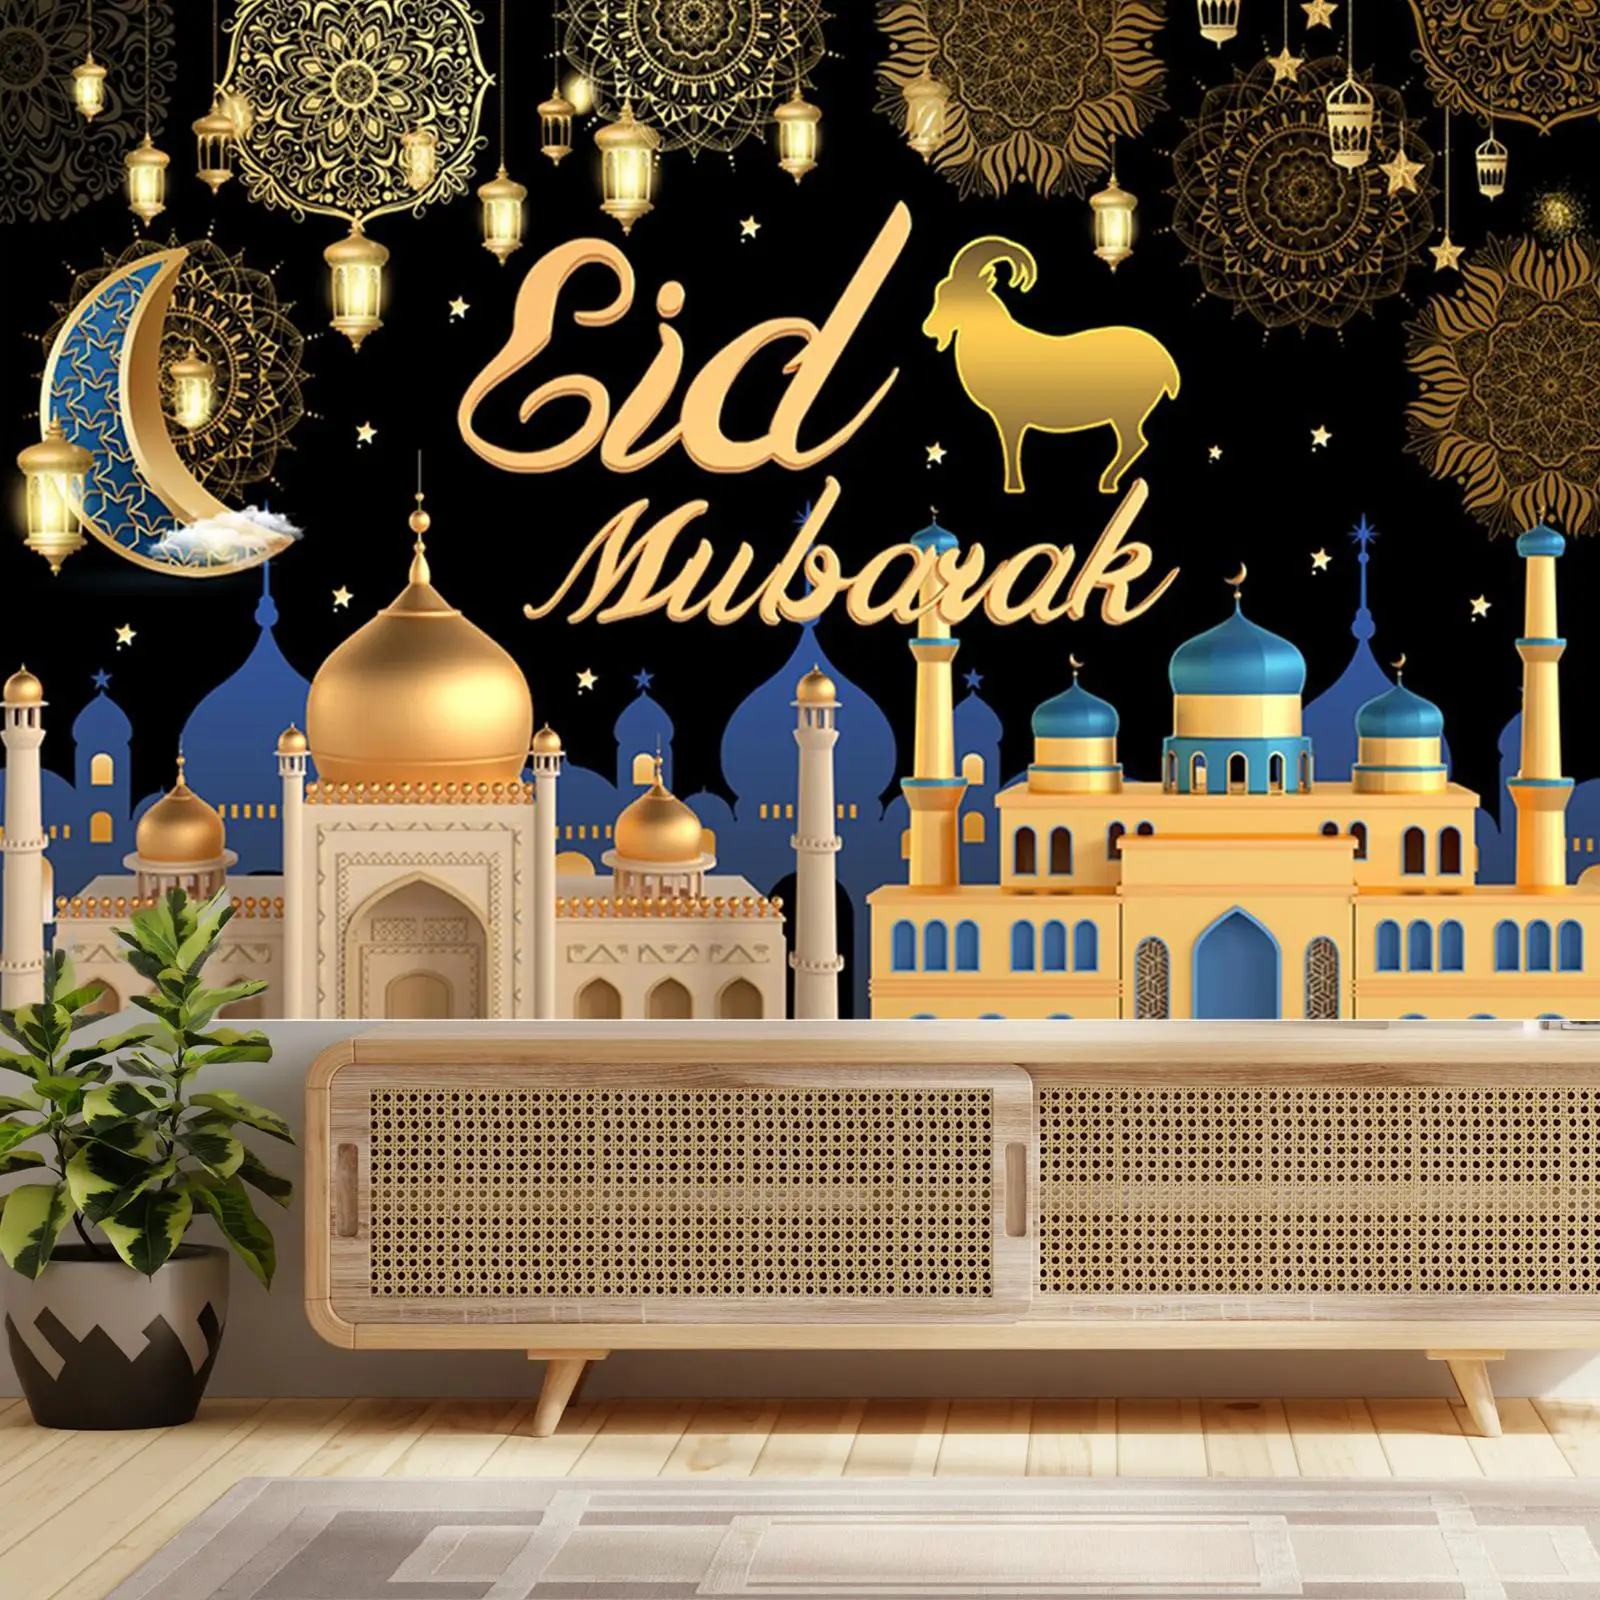 Eid Mubarak Party Backdrop Banner Large Fabric 3.6x5.9 Decorative Background Cloth for Photography Background Muslim Ornament